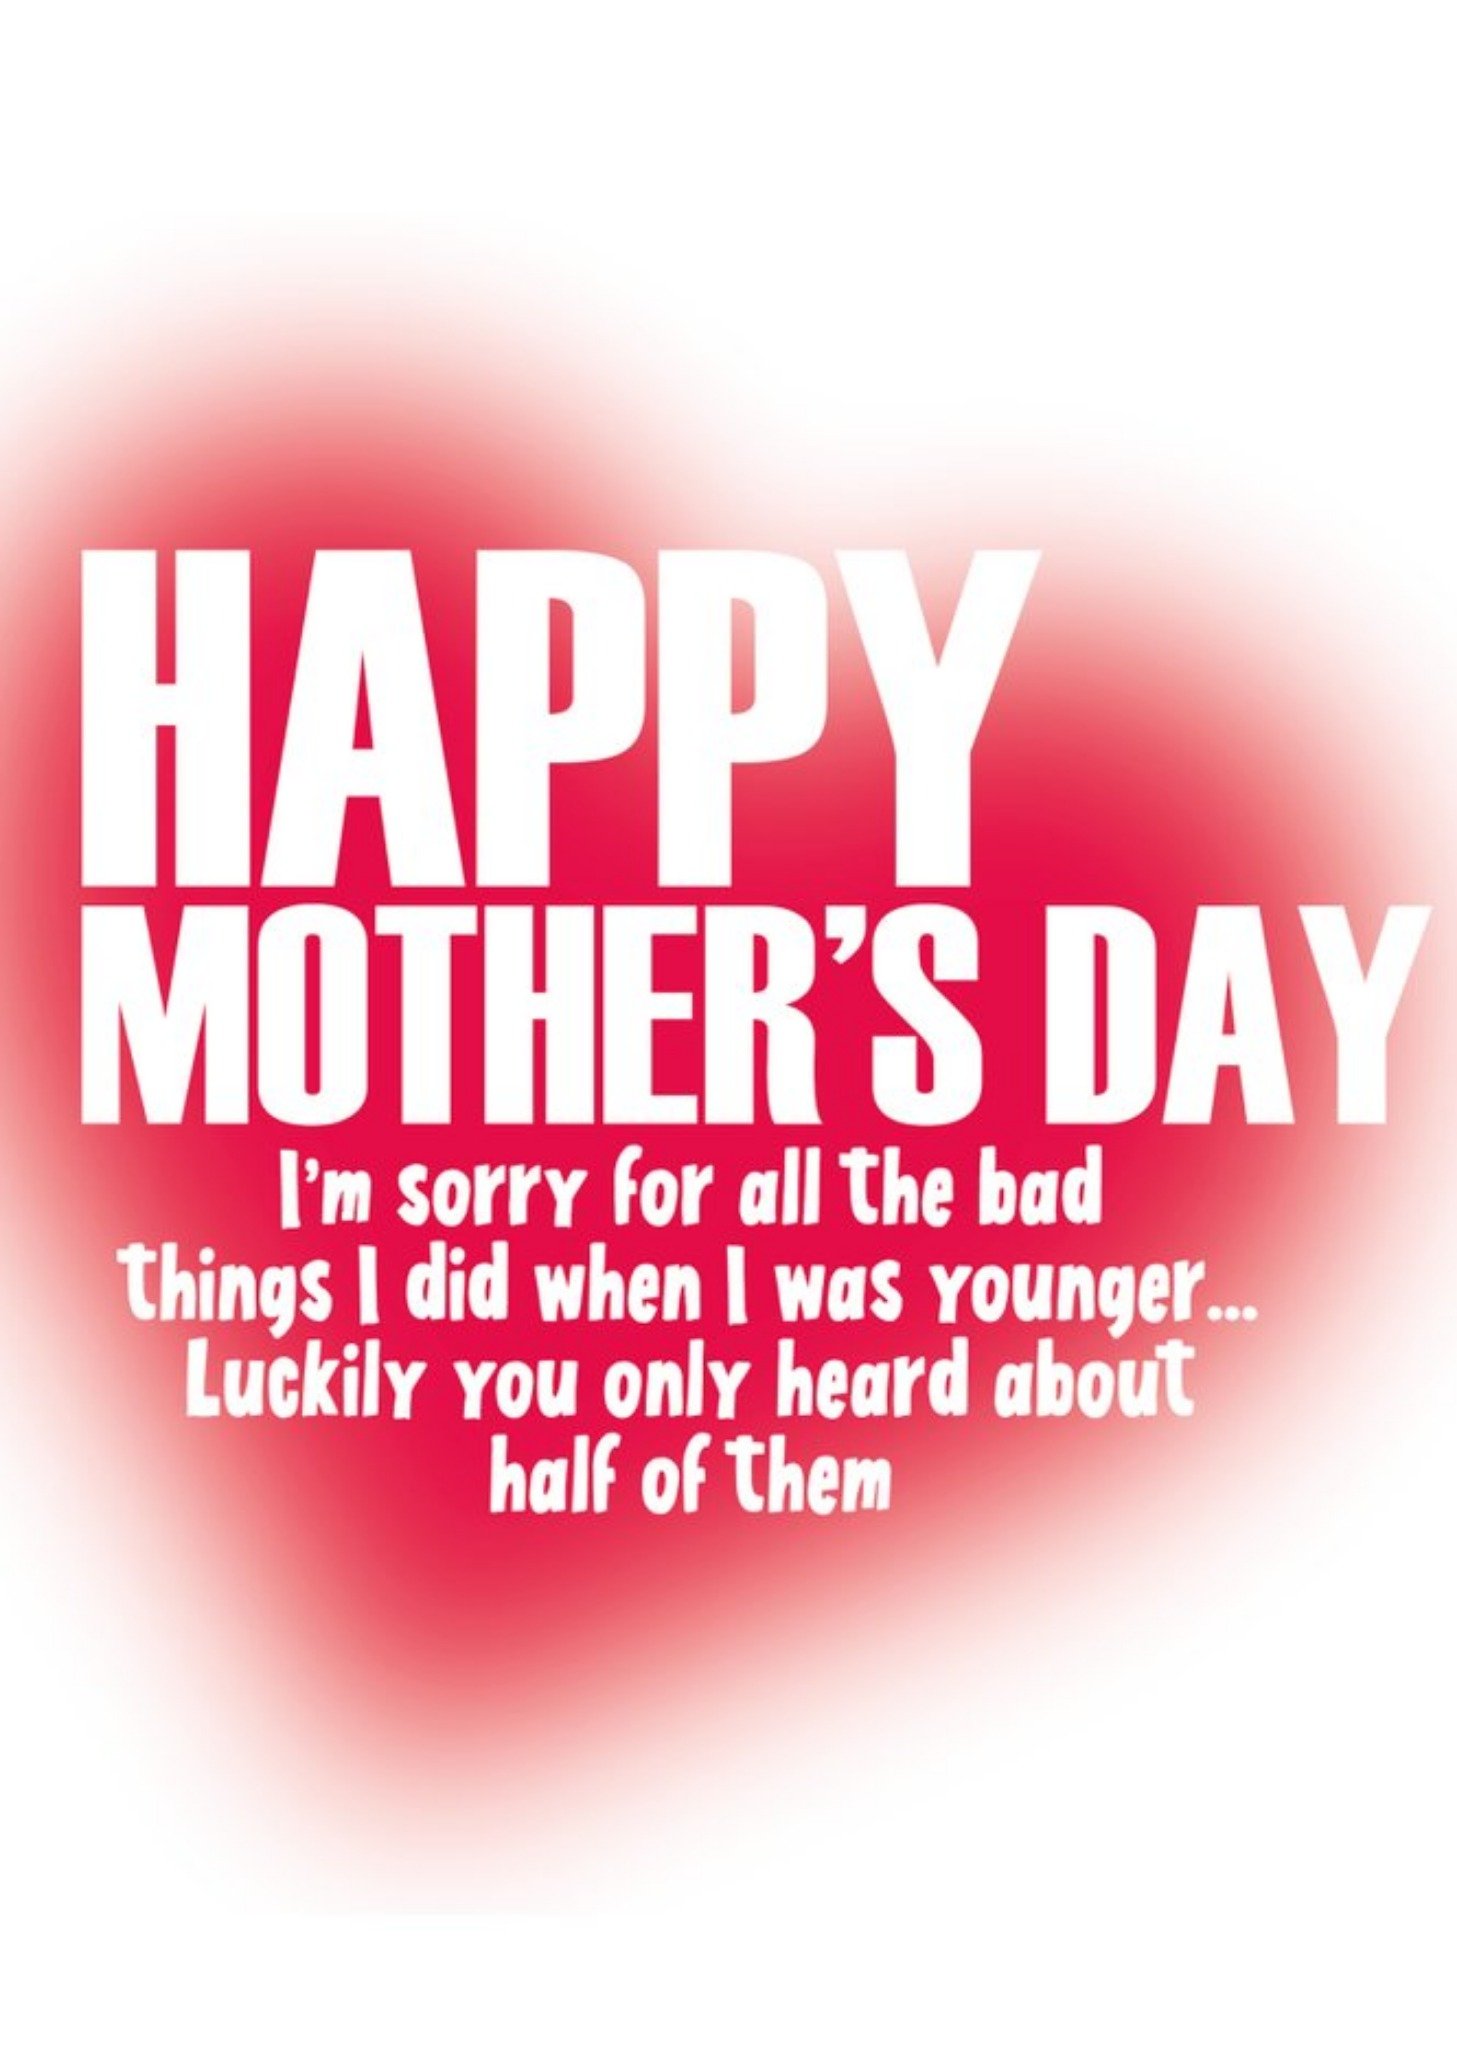 Banter King Typographic Blurred Heart Mothers Day Card Ecard